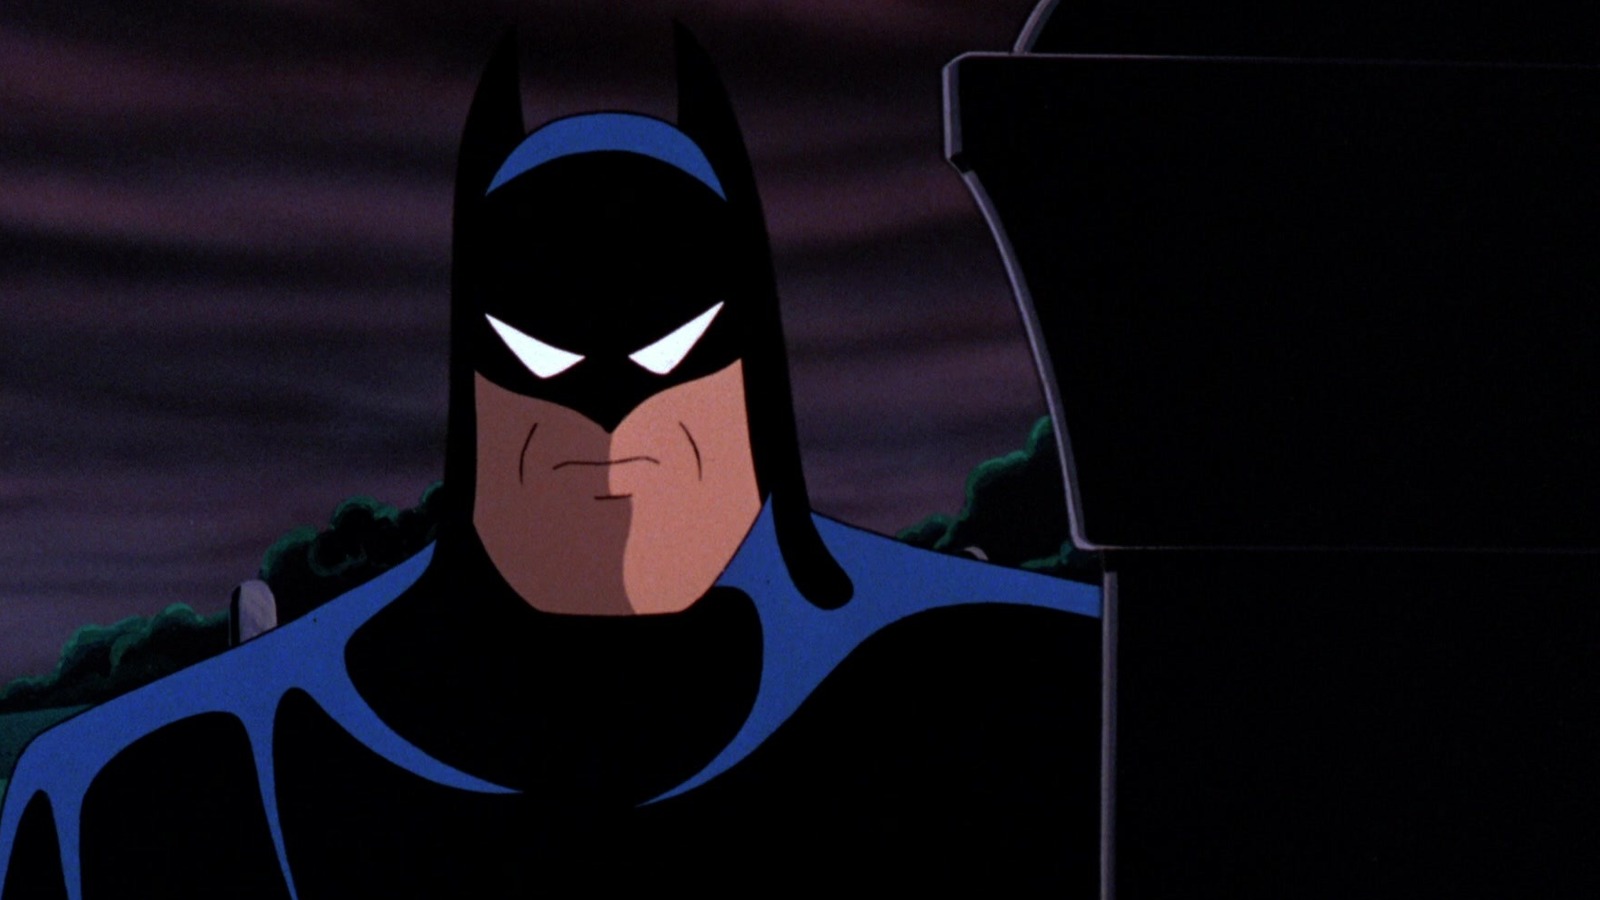 Legendary Batman voice actor Kevin Conroy to pen personal story for DC Pride